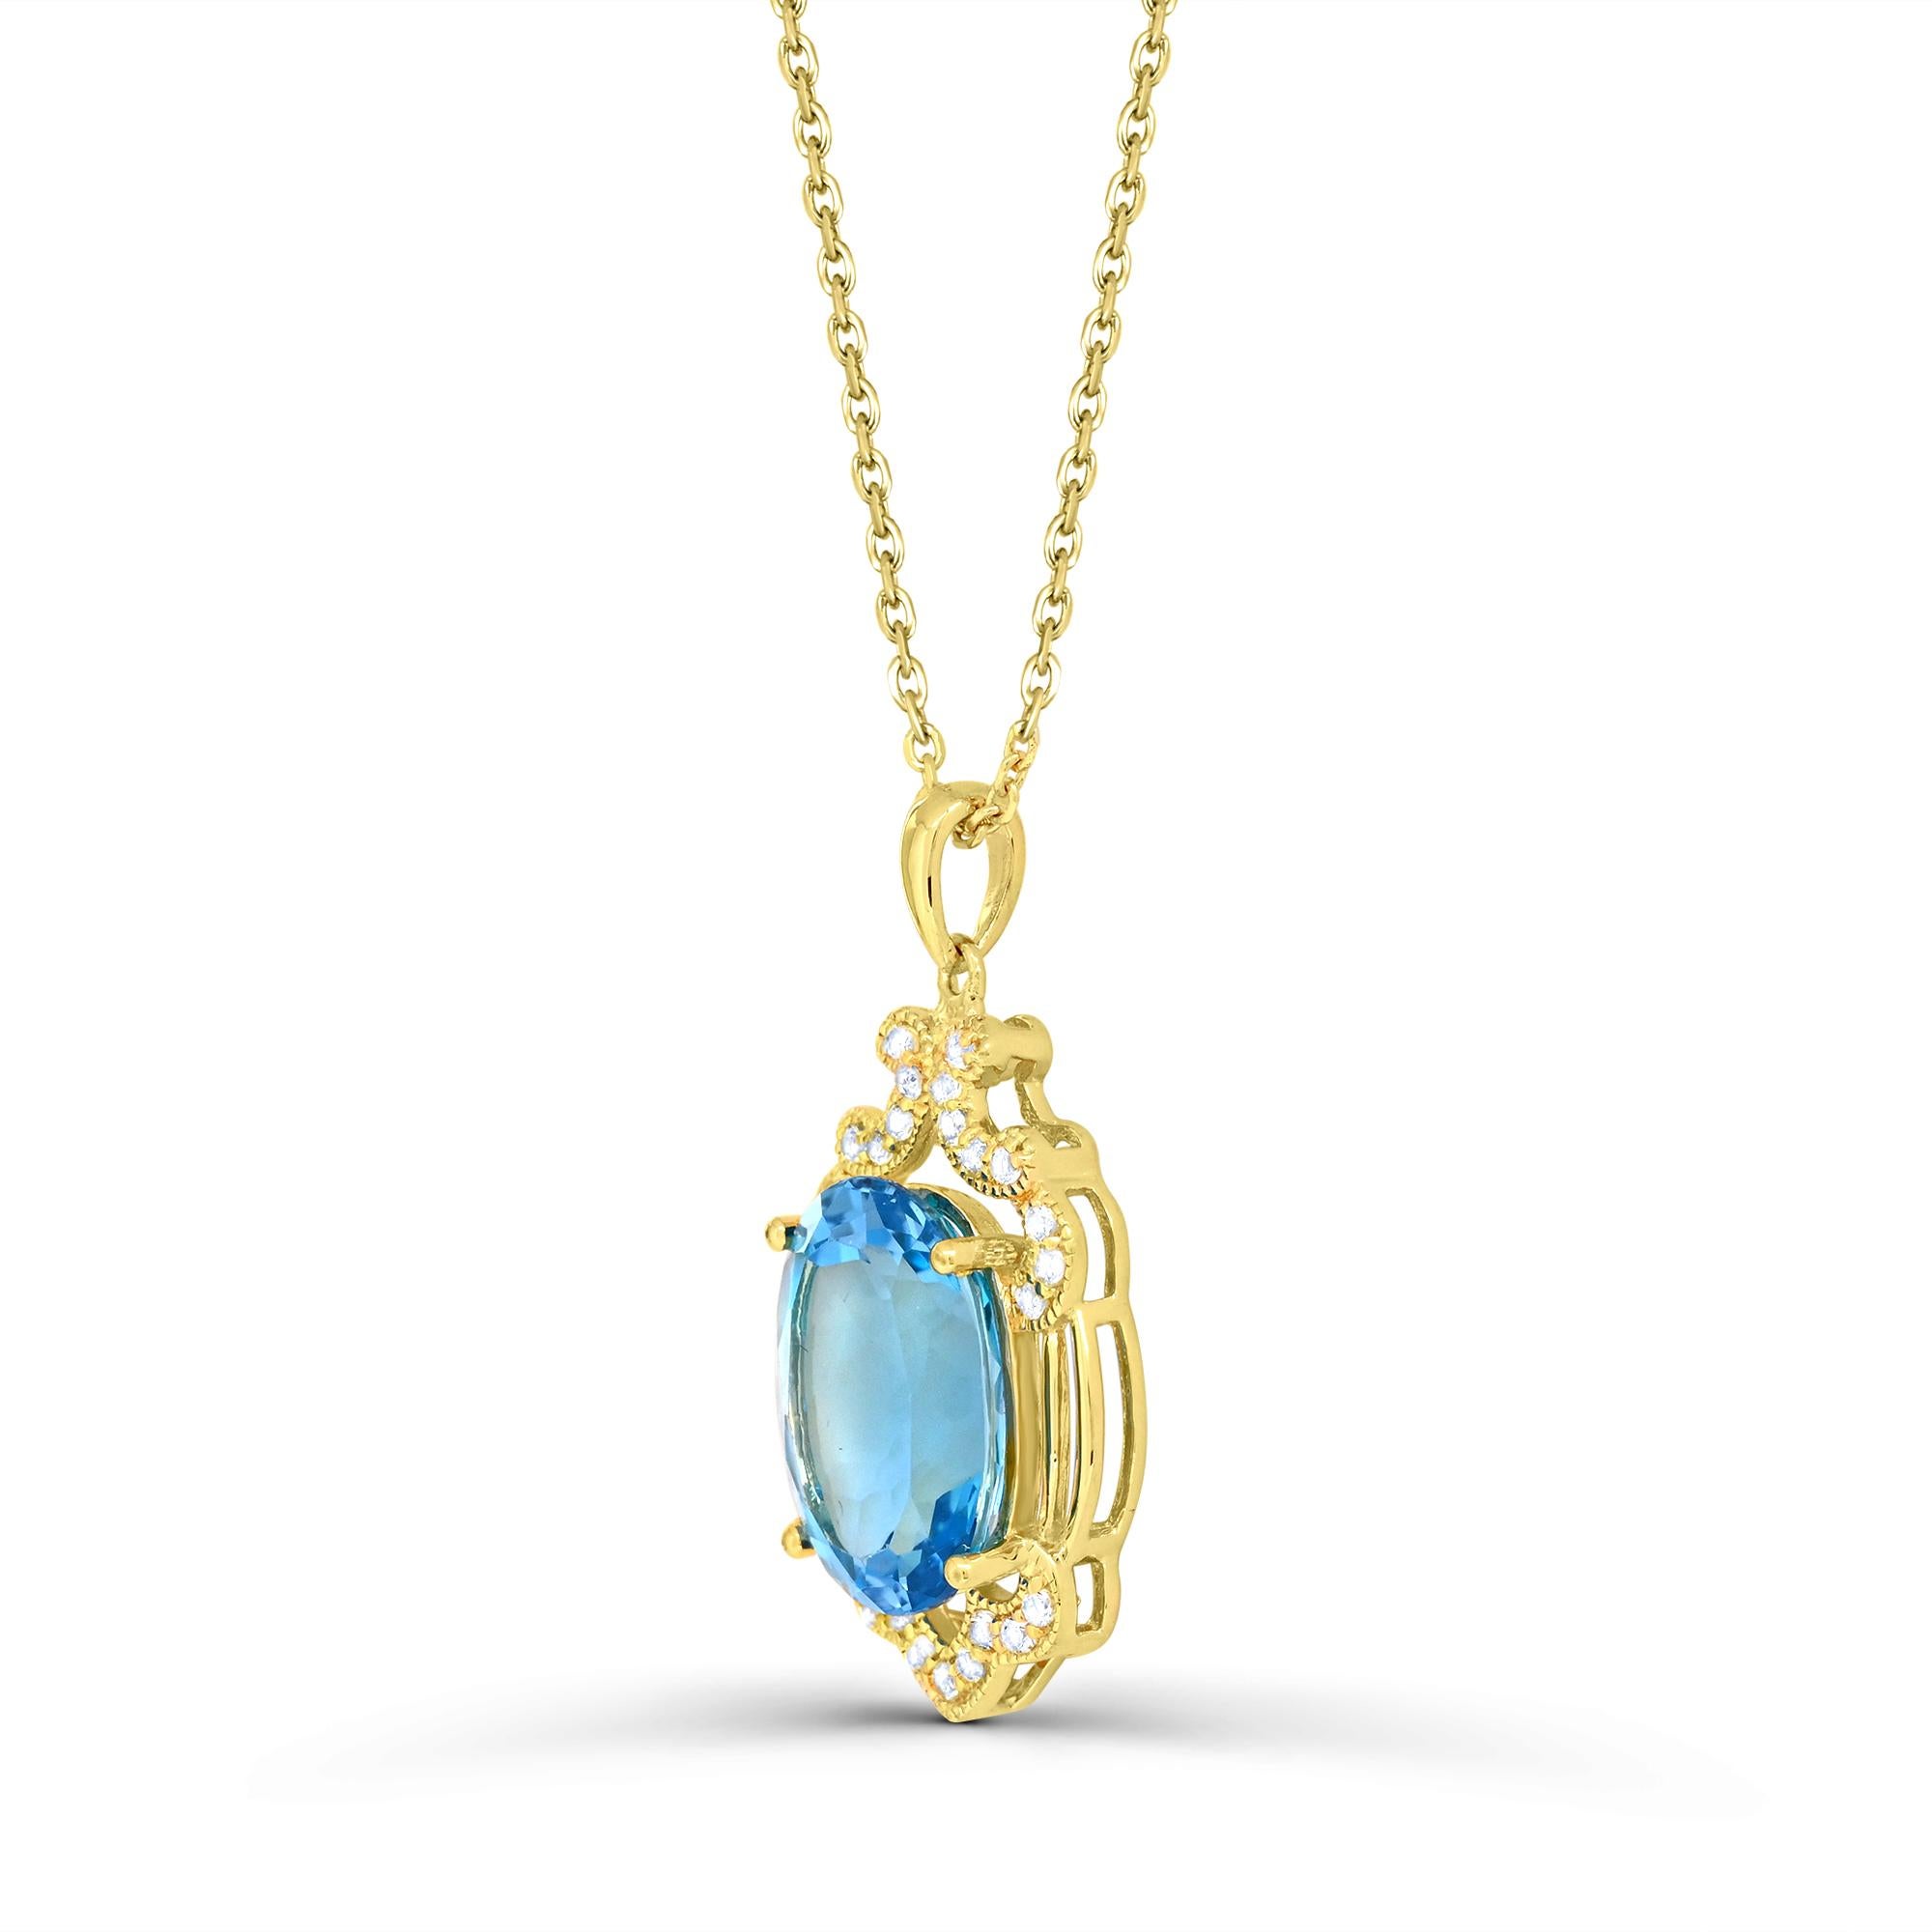 Art Deco 8-1/8 Carat White & Blue Topaz Necklace in 14K Yellow Gold over Sterling Silver For Sale